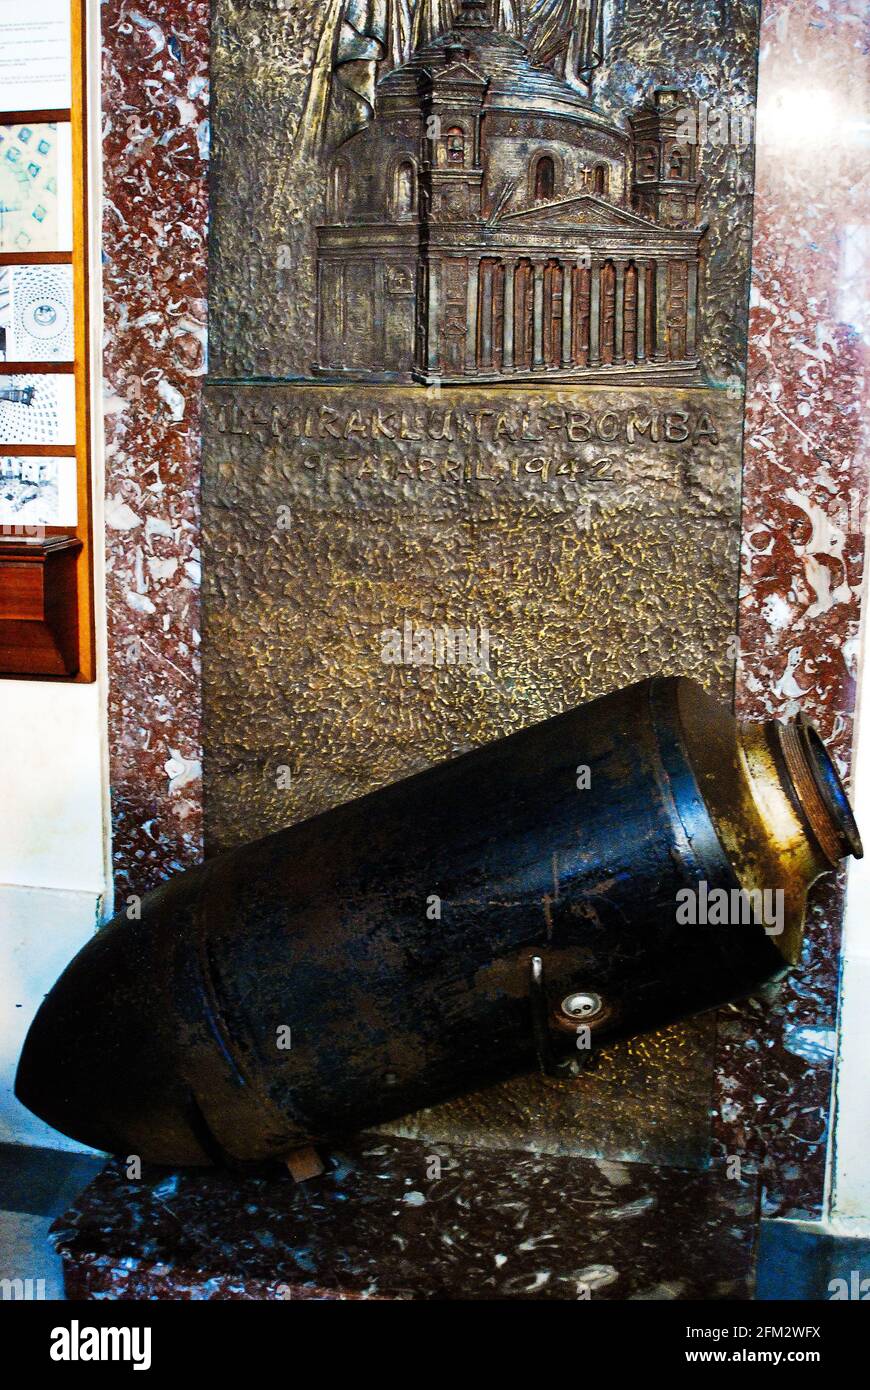 The replica of the bomb from the second world war which didnt detonated in Mosta Rotunda Stock Photo